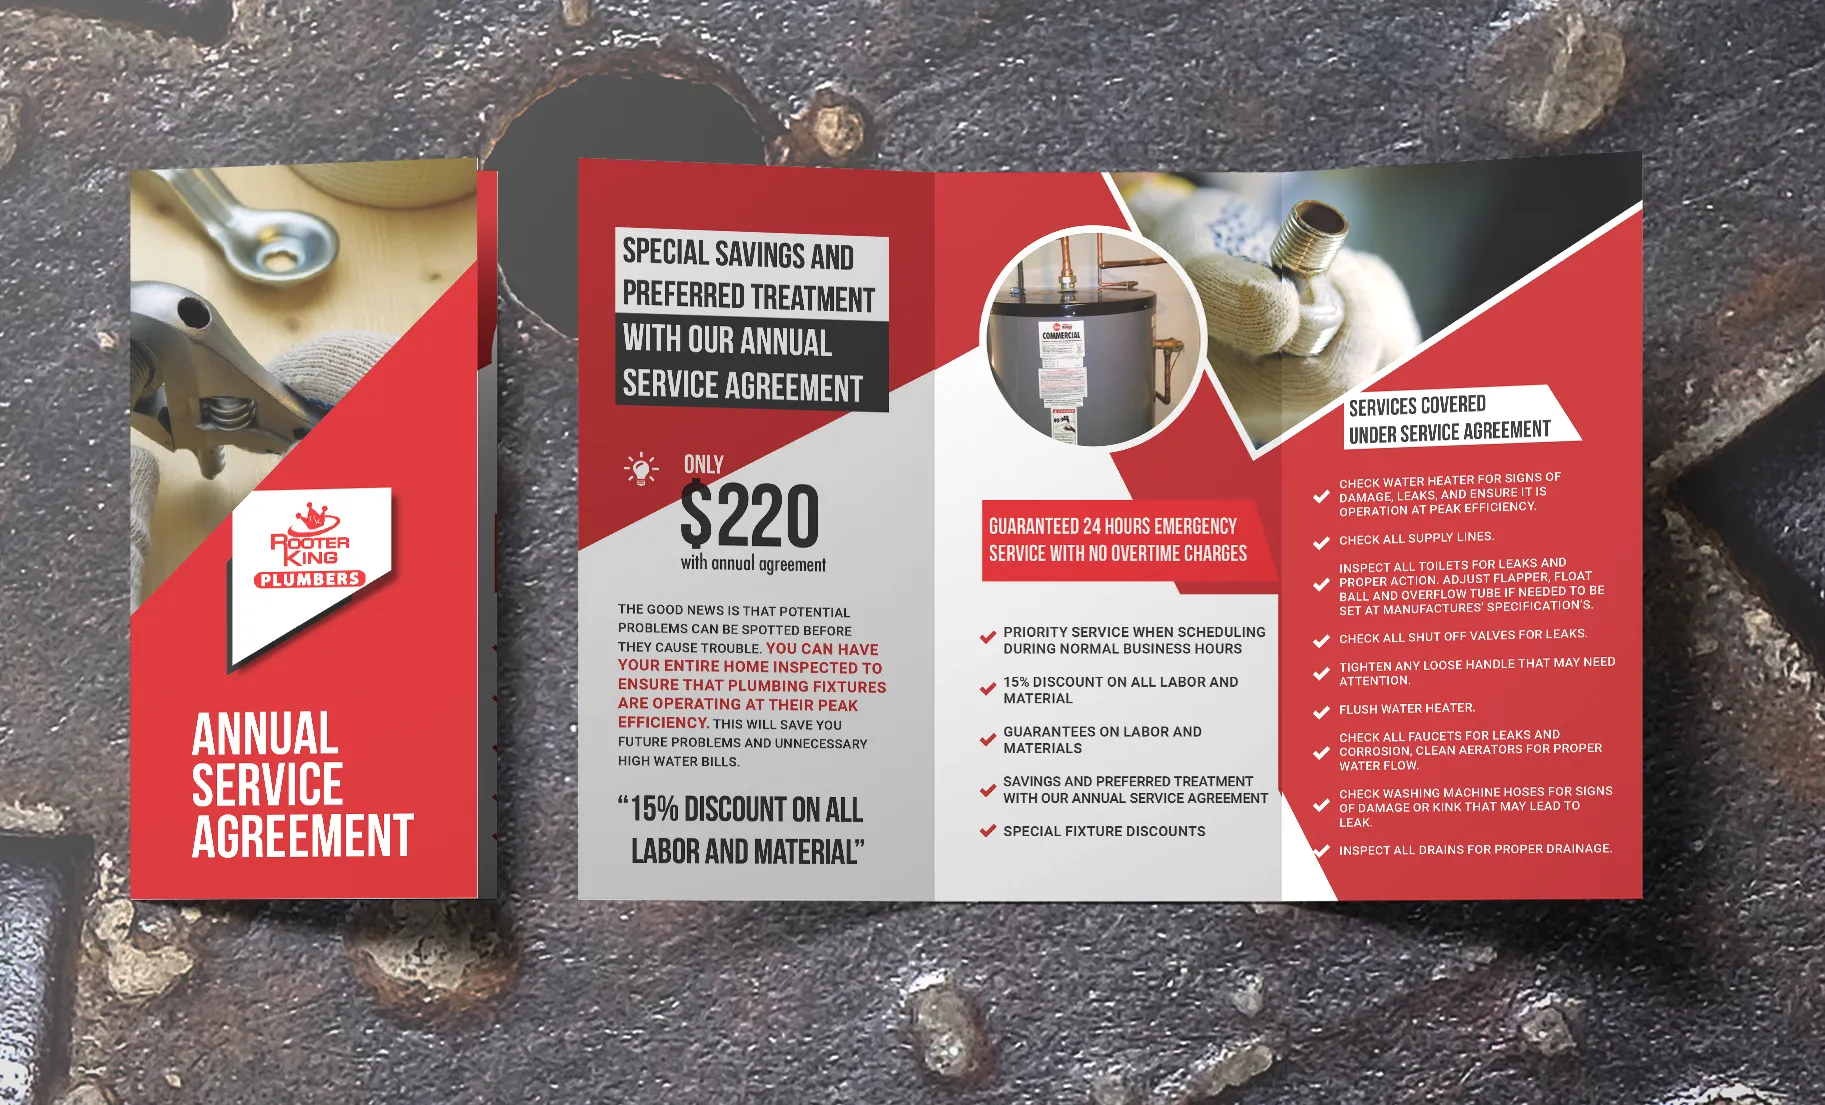 Rooter King Plumbers Annual Service Agreement Brochure